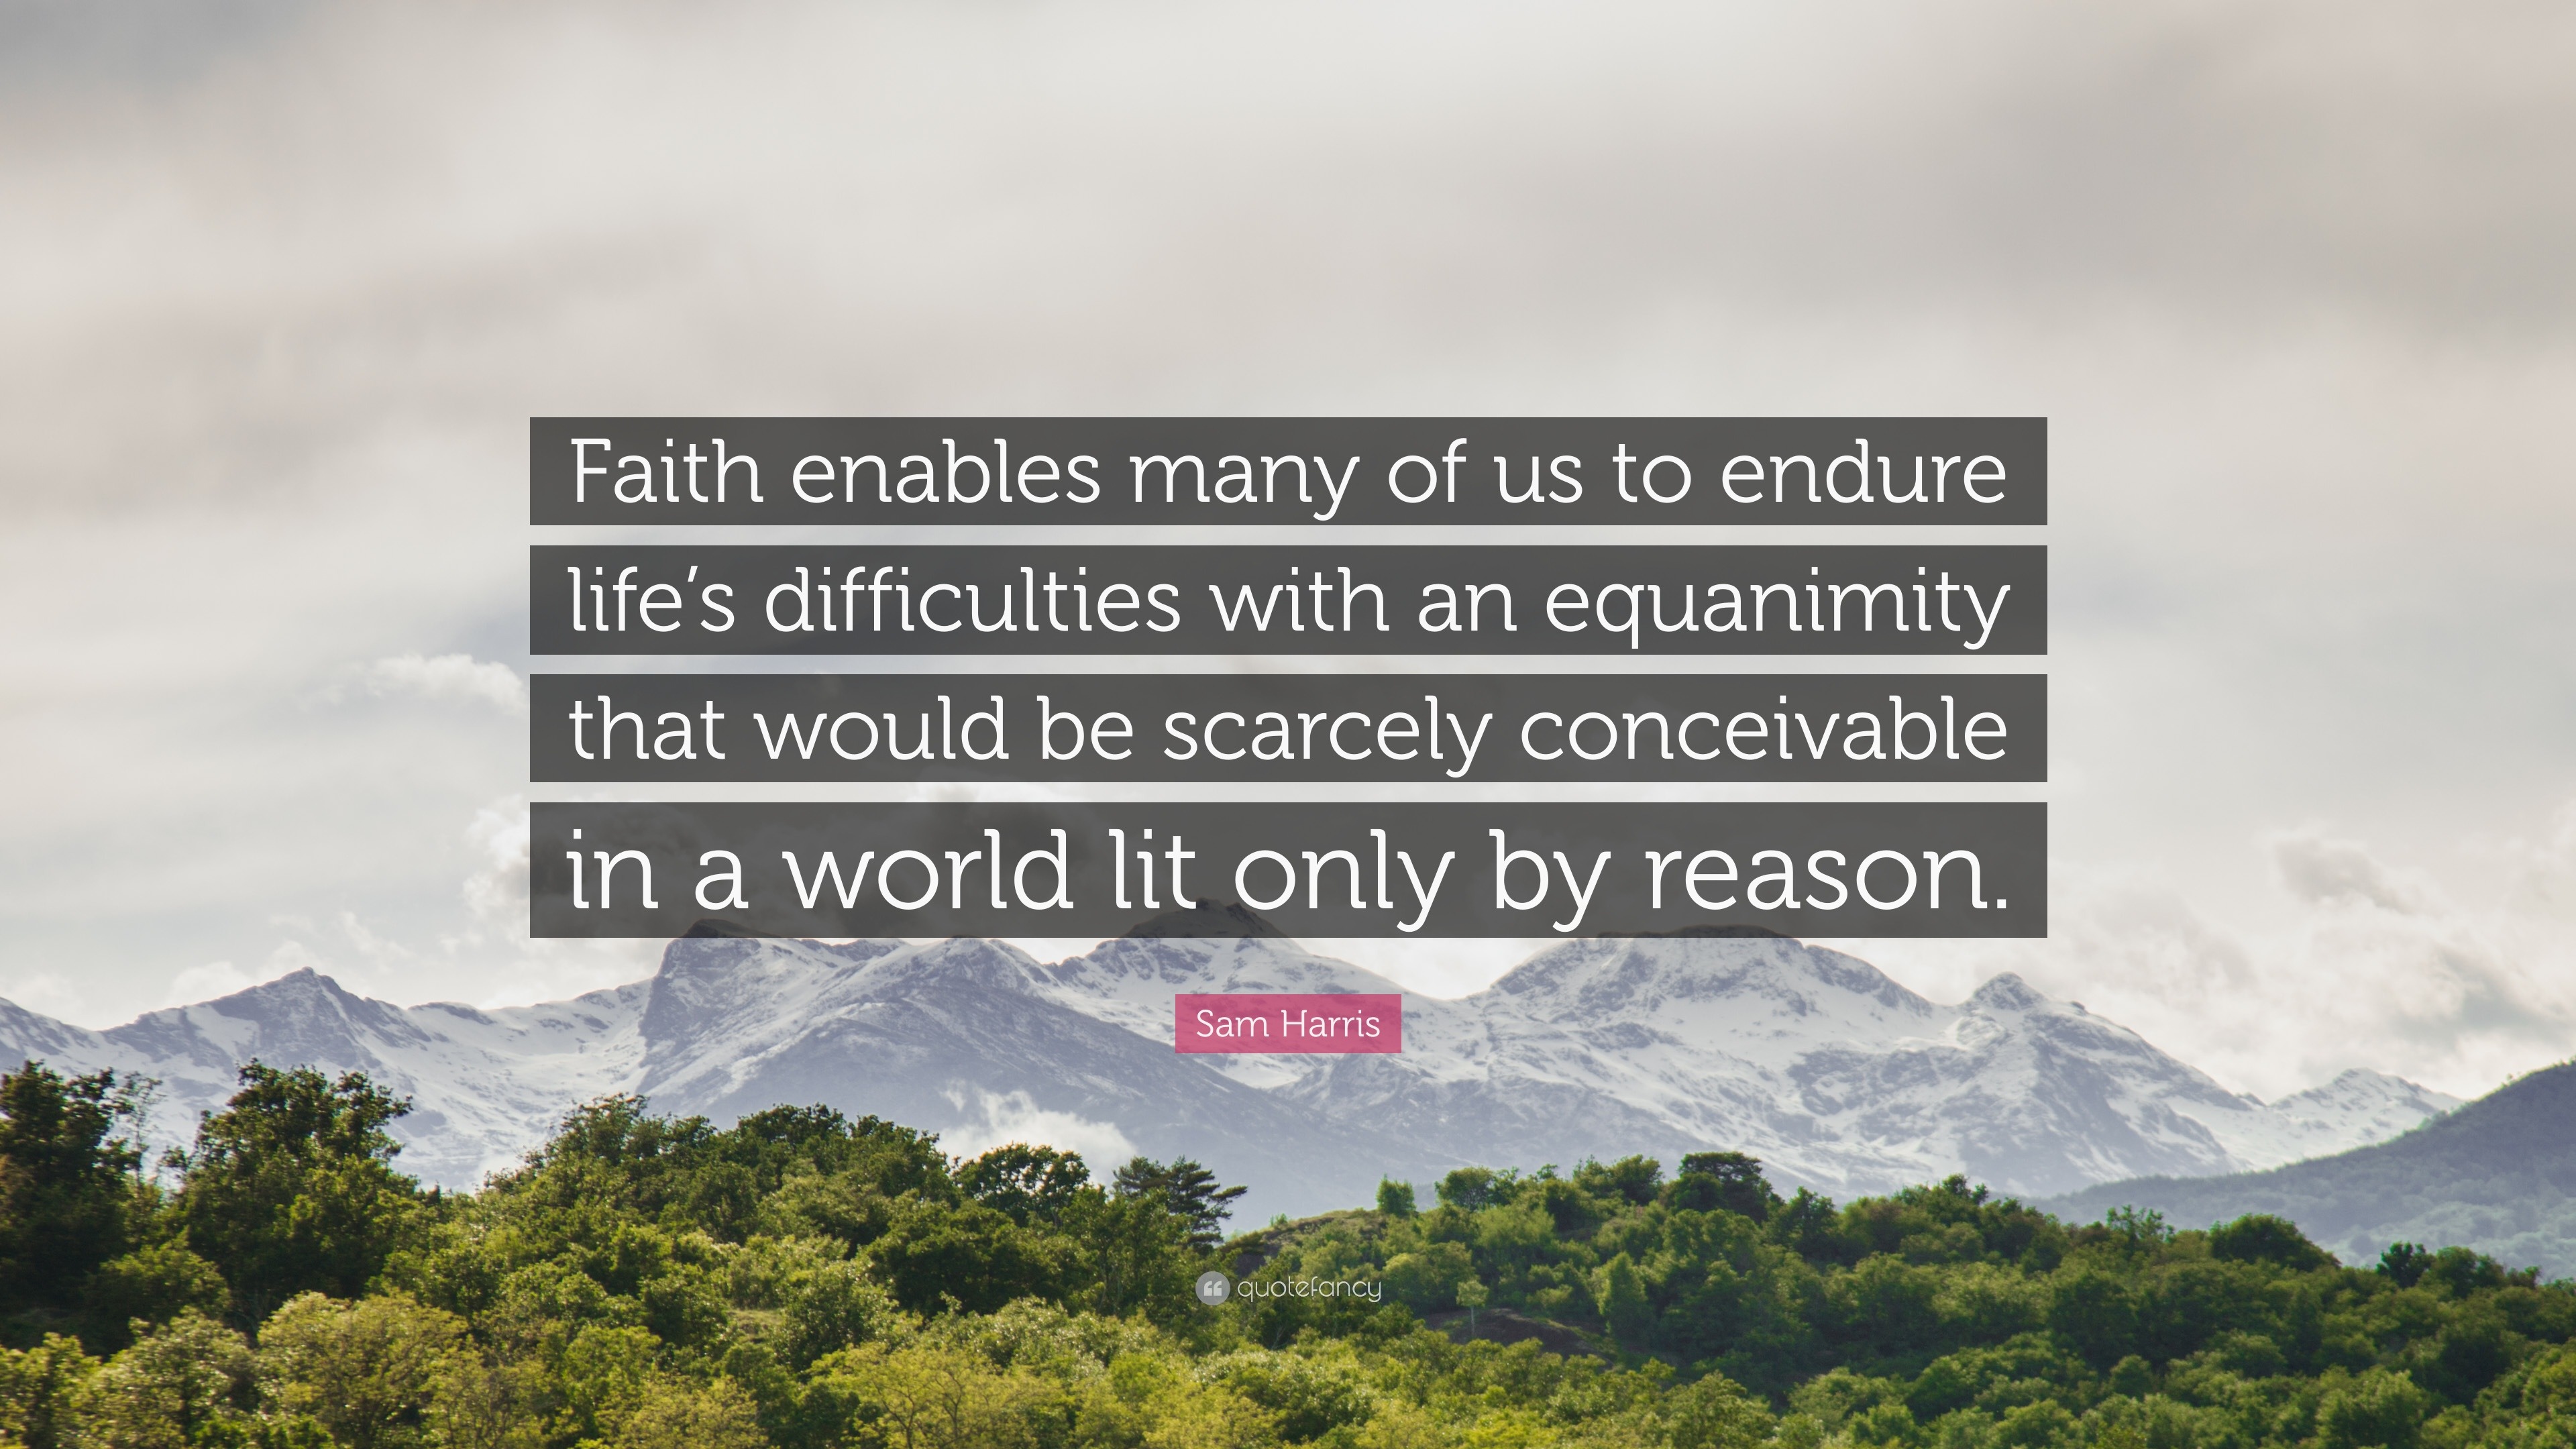 Sam Harris Quote Faith Enables Many Of Us To Endure Life S Difficulties With An Equanimity That Would Be Scarcely Conceivable In A World 12 Wallpapers Quotefancy